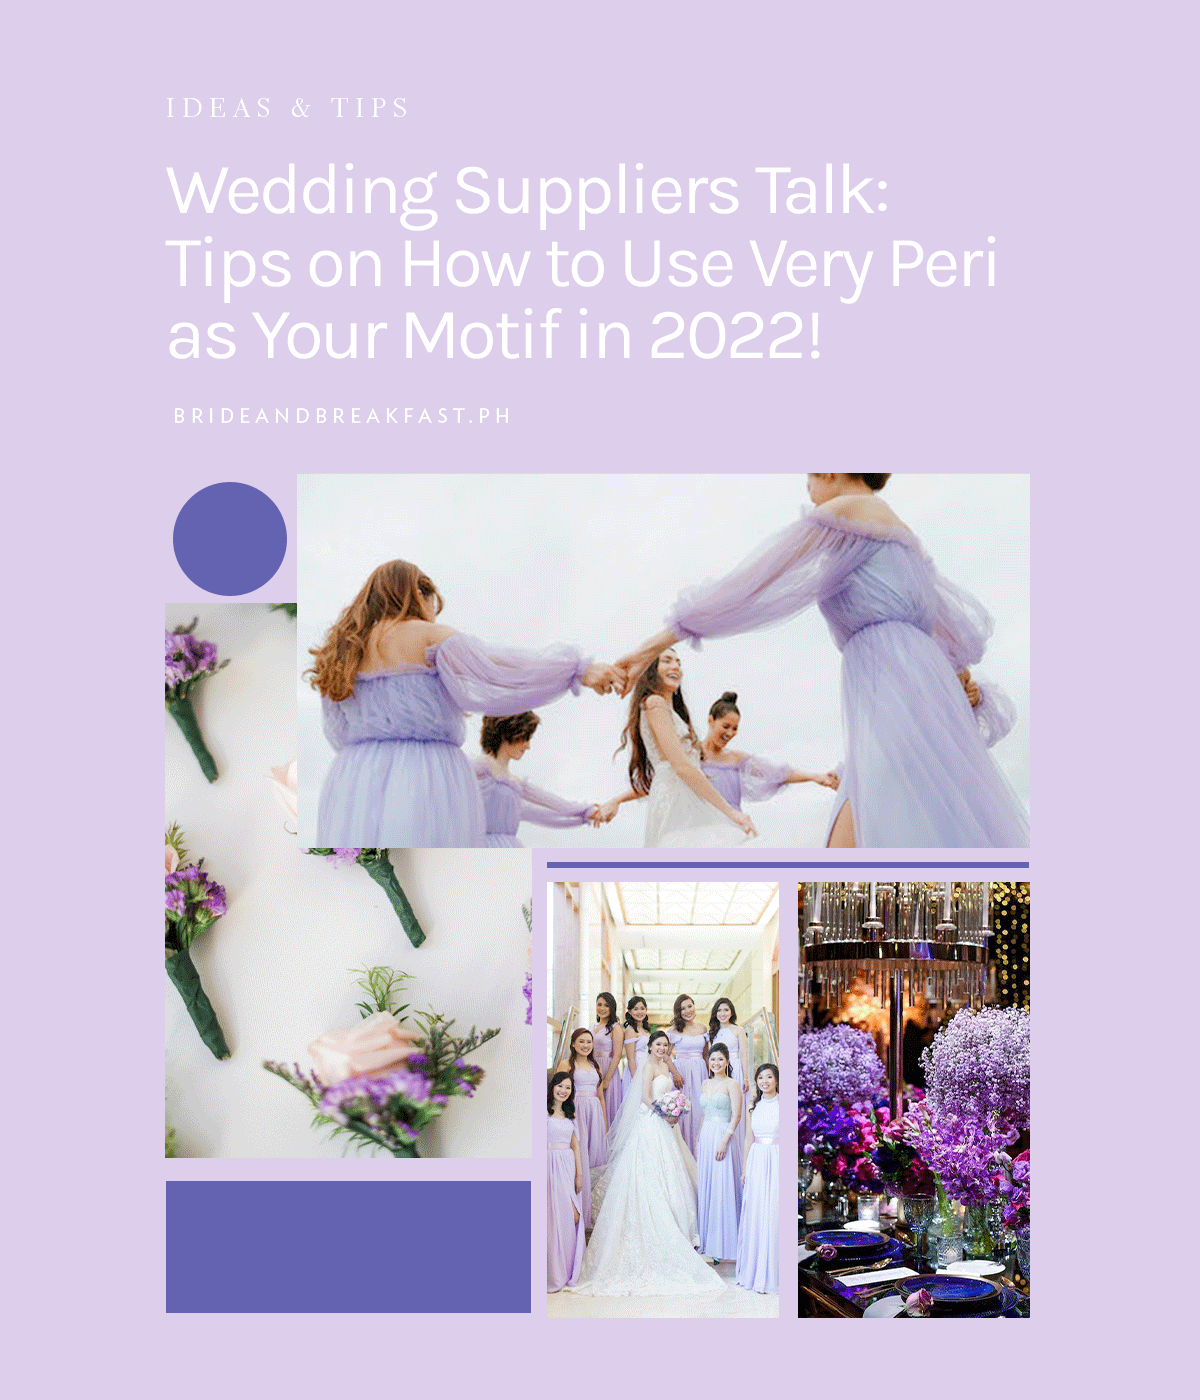 Wedding Suppliers Talk: Tips on How to Use Very Peri as Your Motif in 2022!